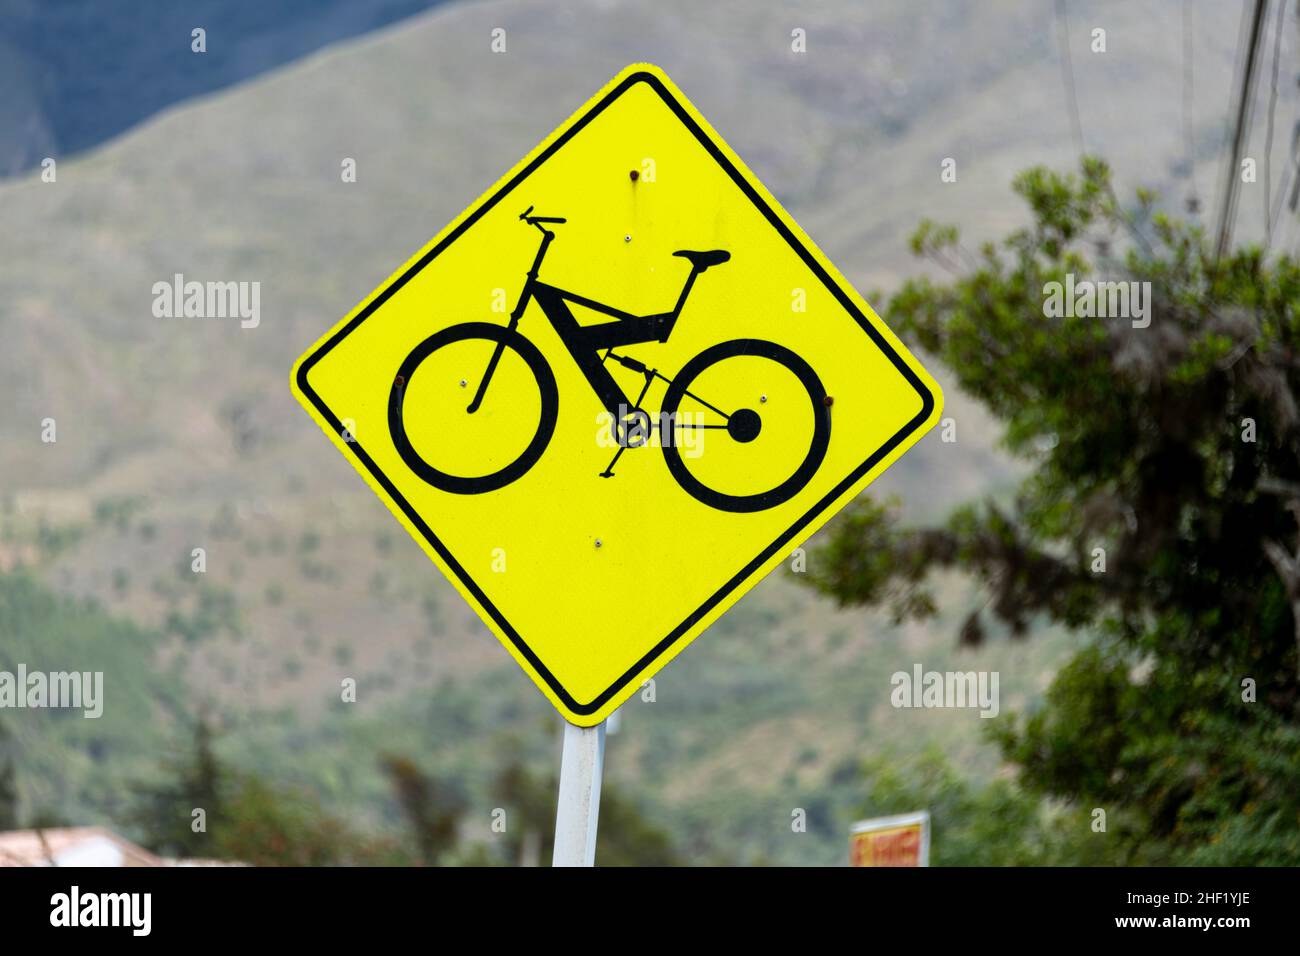 Bicycle & Pedestrian Crossing Ahead Road Signs Poster for Sale by  WHBPhotoArt